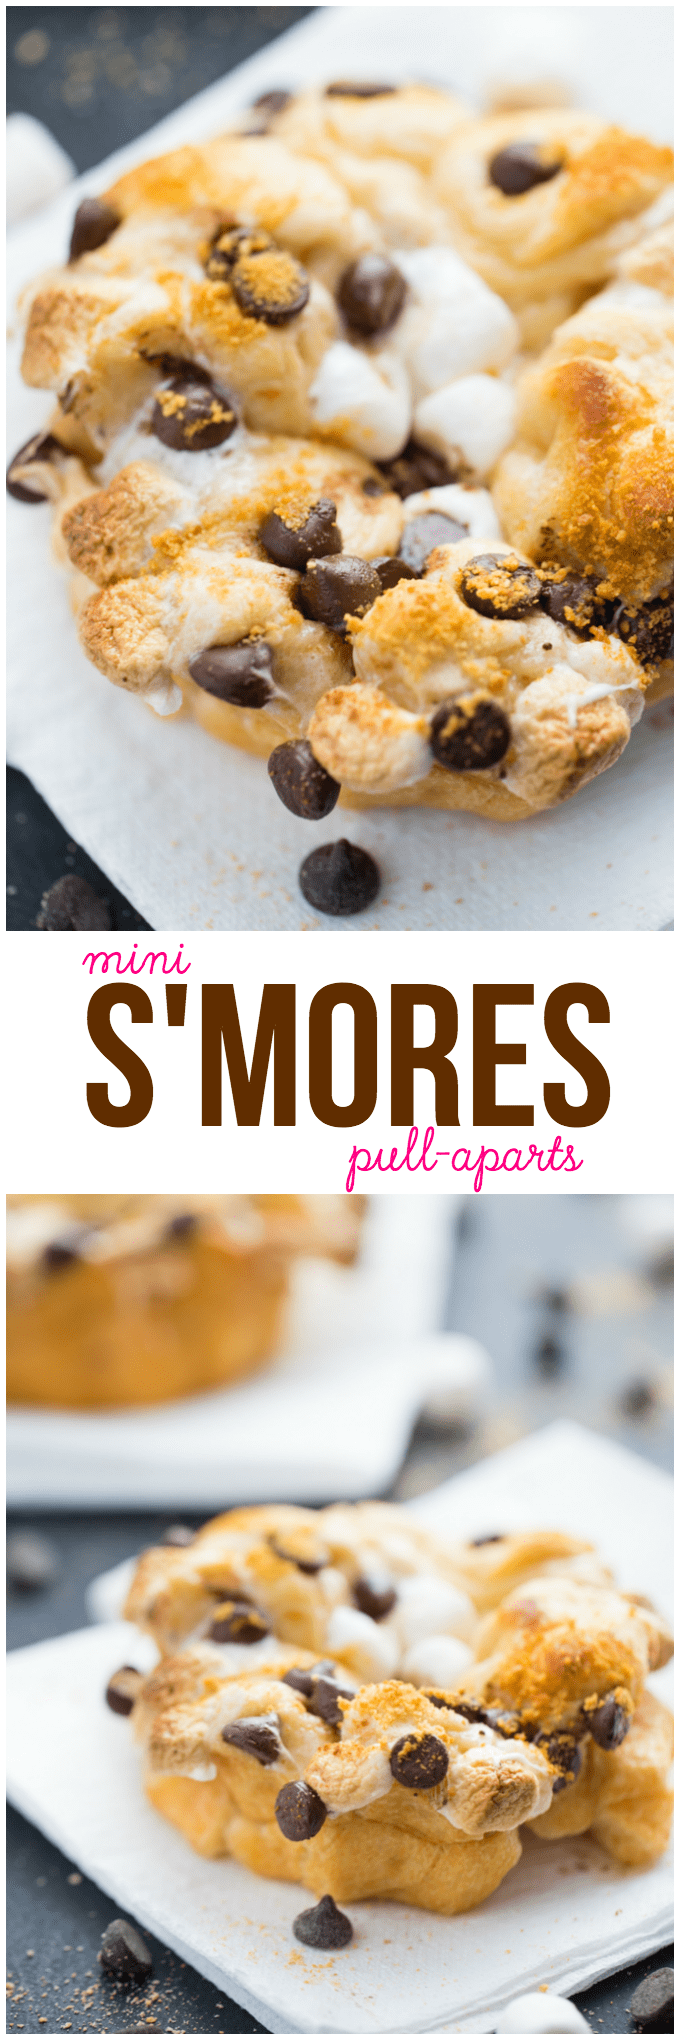 Mini S'mores Pull-Aparts - More s'mores please! These mini pull-apart desserts are quick and easy with ready-made dough. Only 4 ingredients!